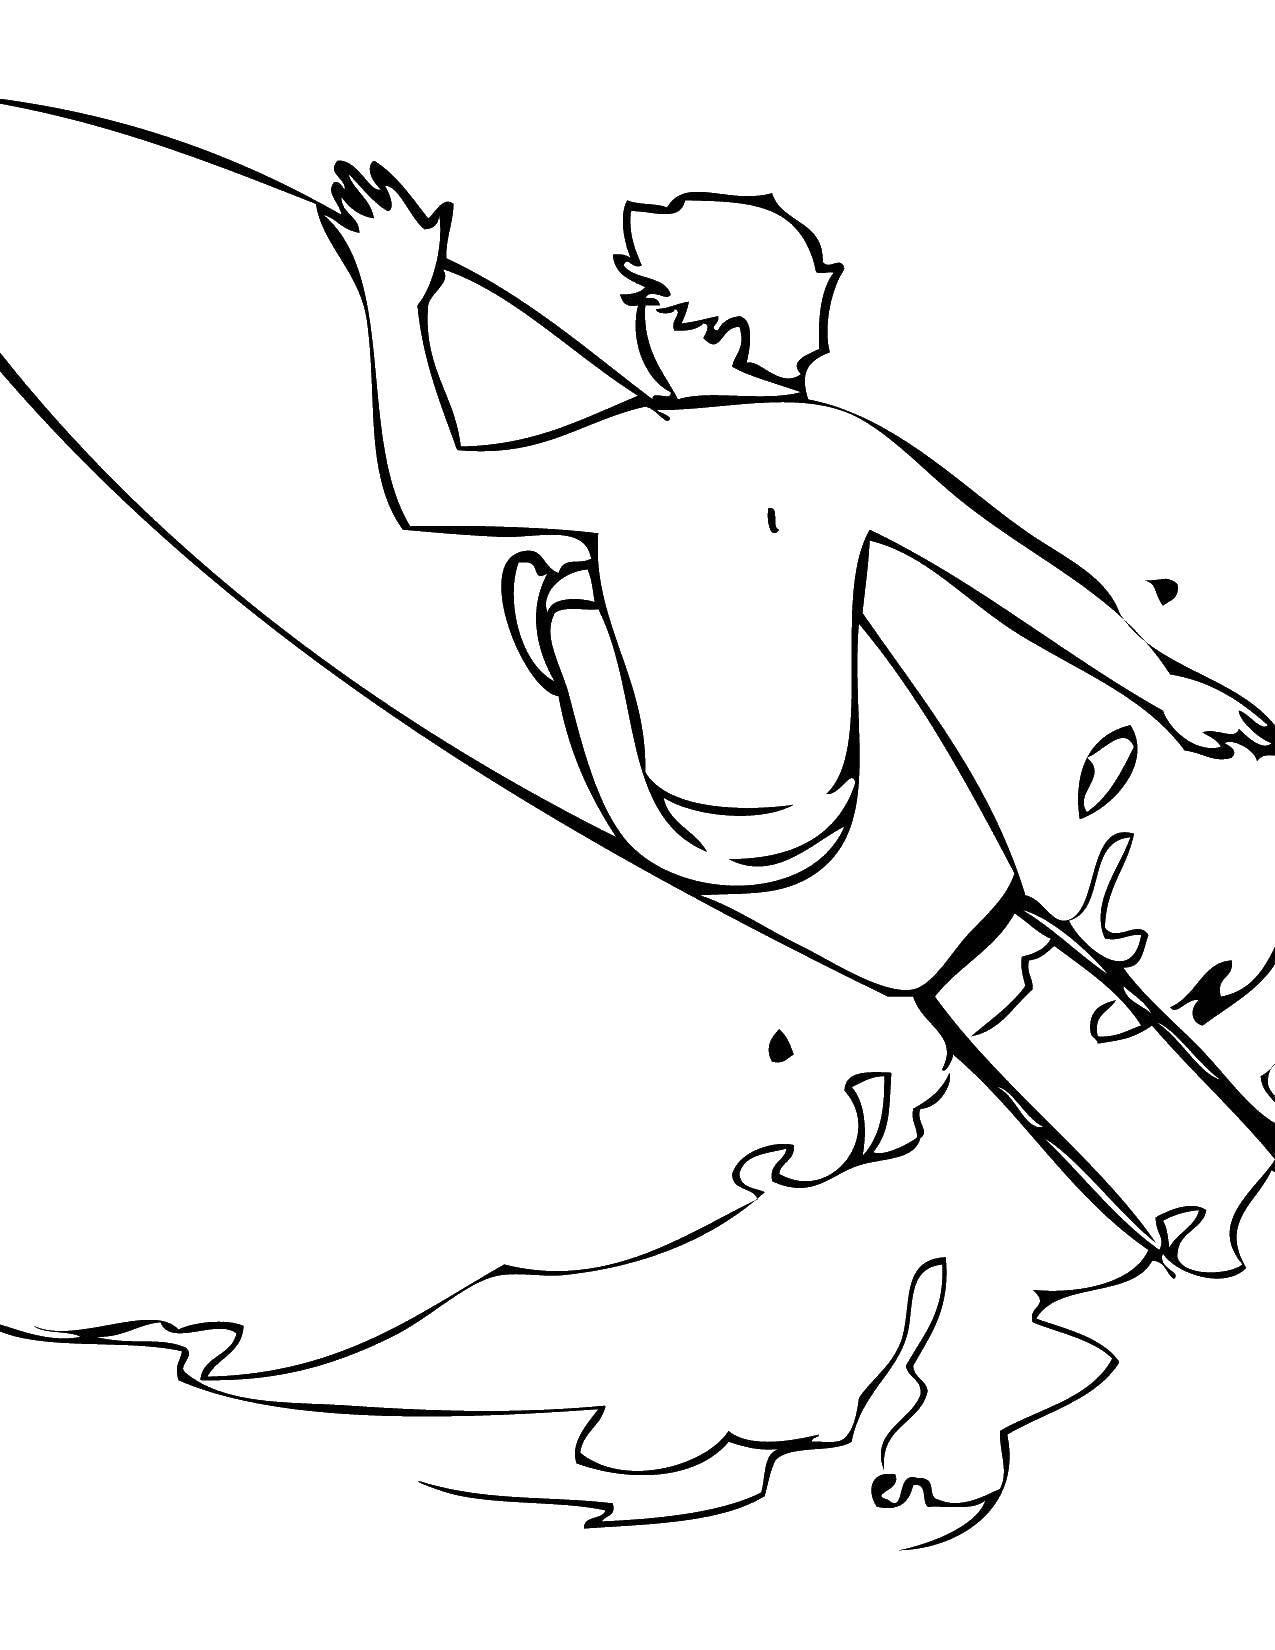 Coloring Surfing. Category Sports. Tags:  Sport, surfing, water.